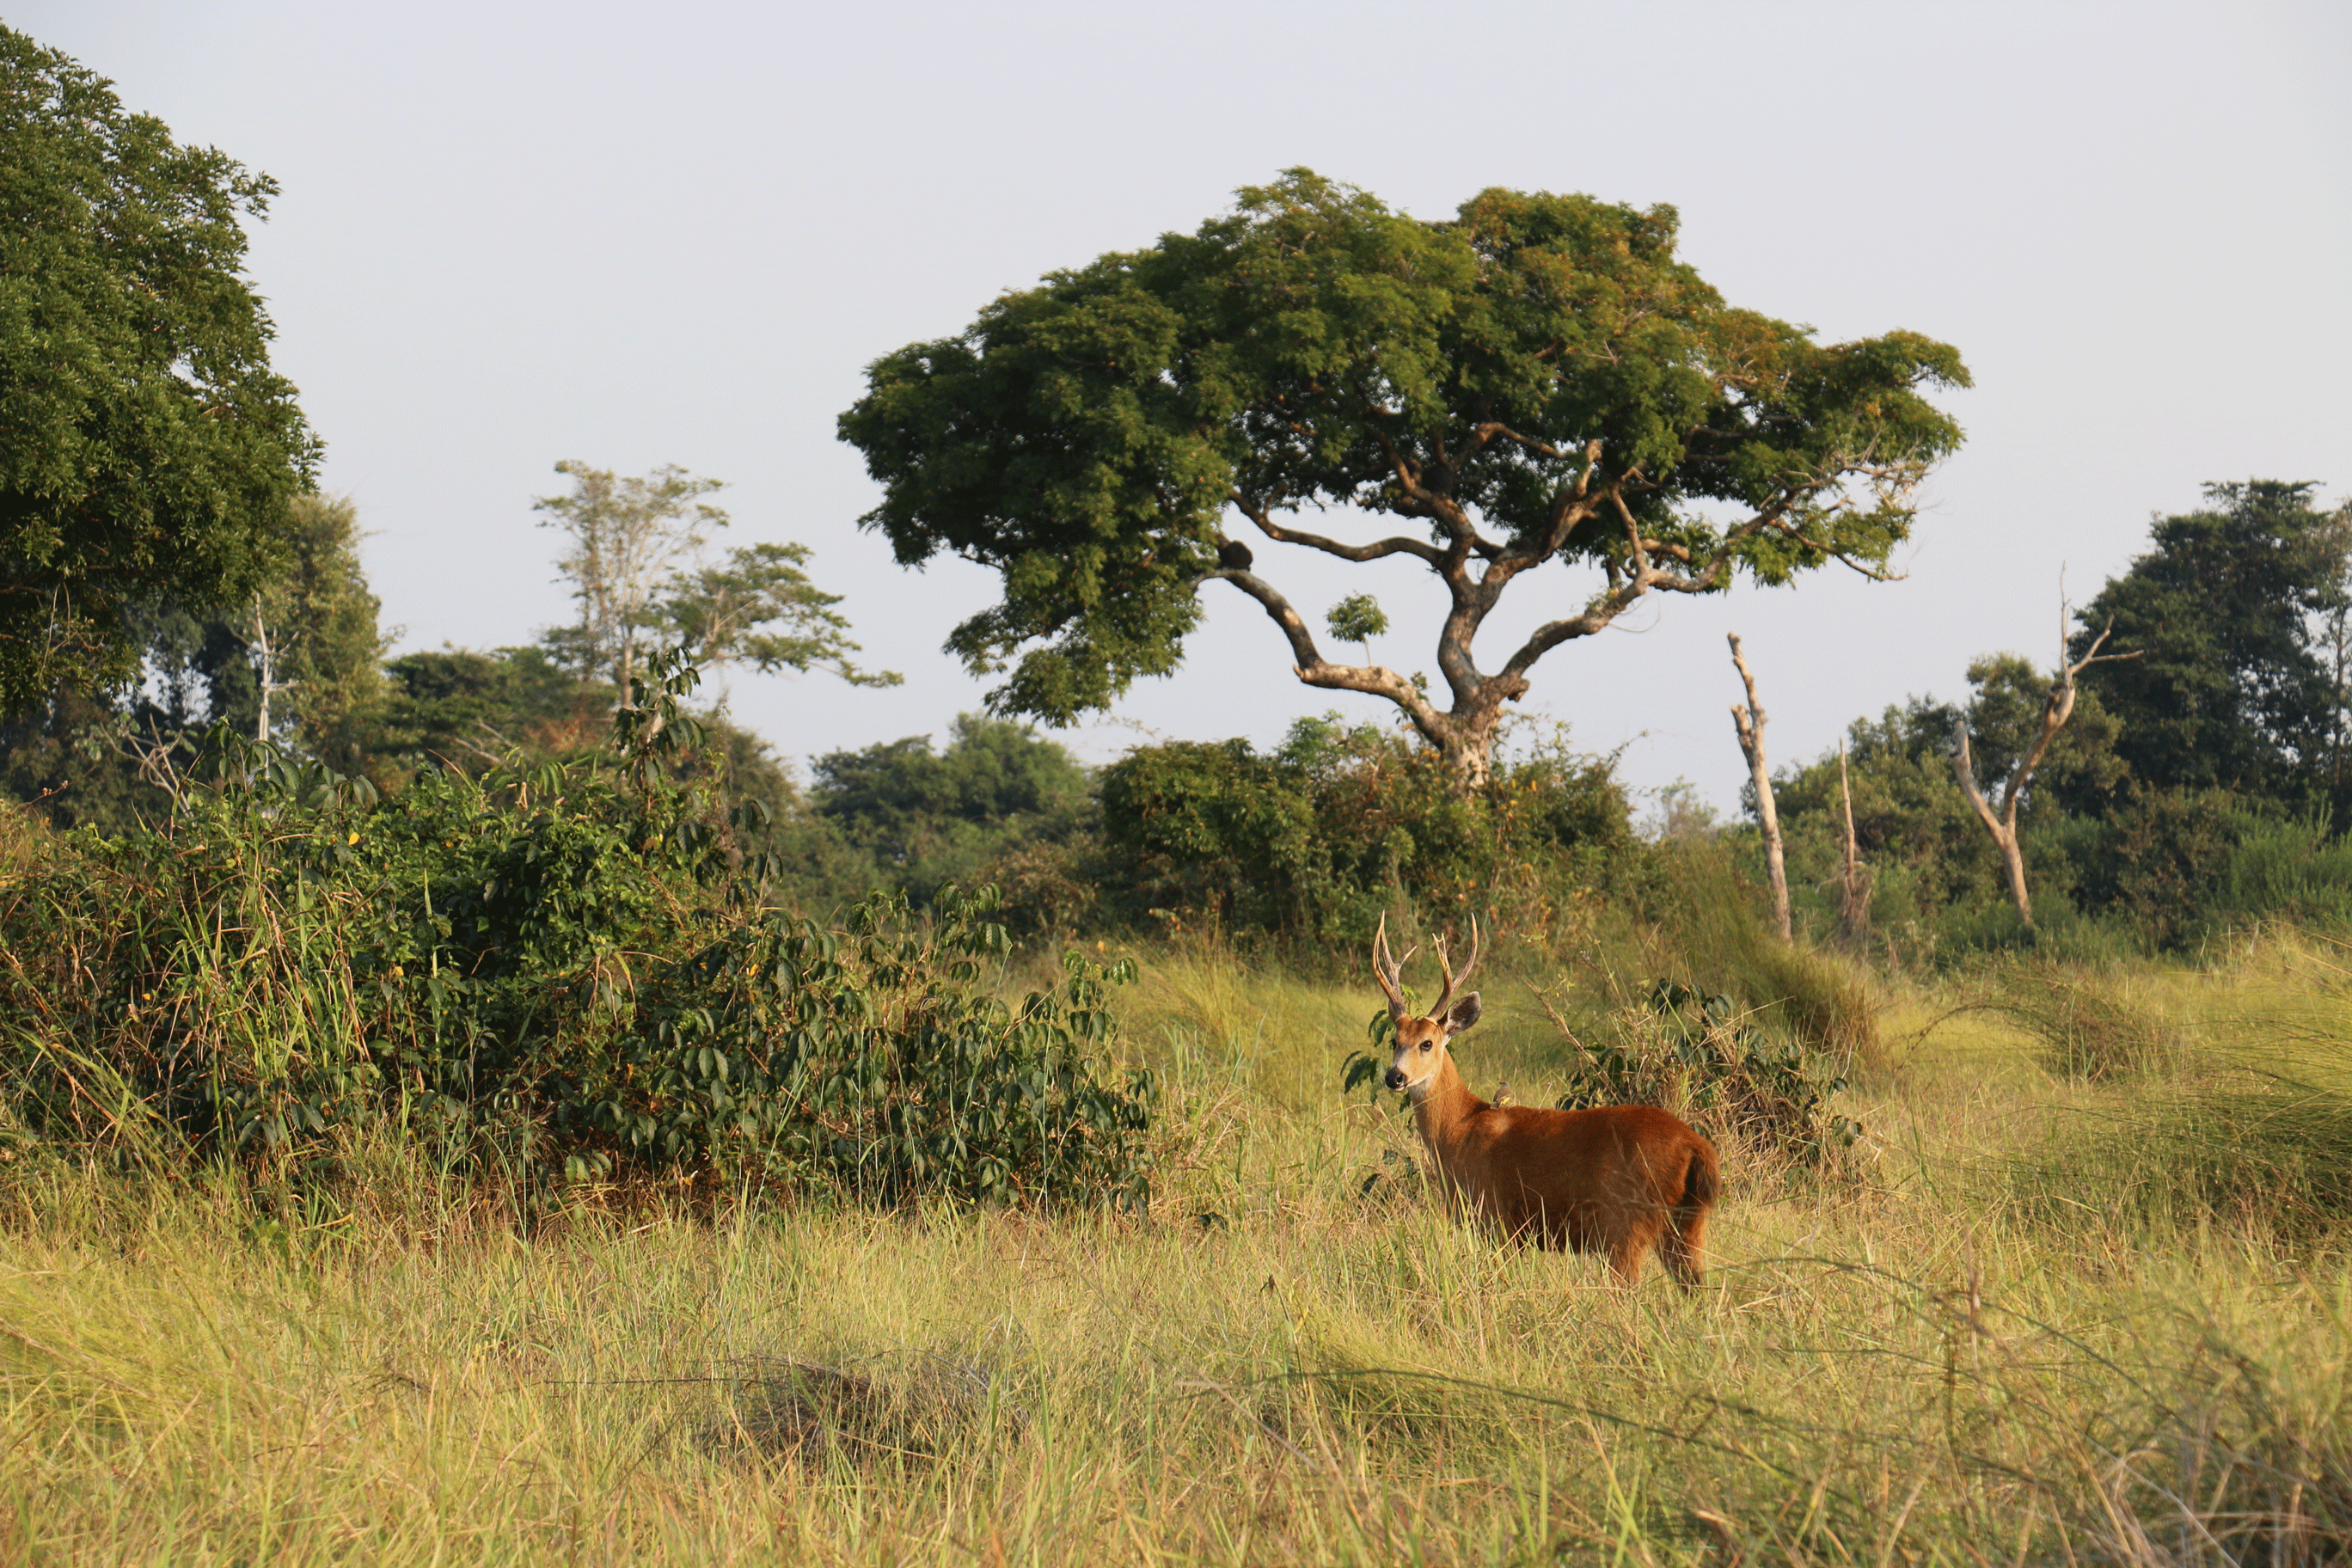 A marsh deer approaches the forest edge. It’s among the few mammals species not expected to be negatively affected by savannization in the Amazon (Daniel Rocha/UC Davis)